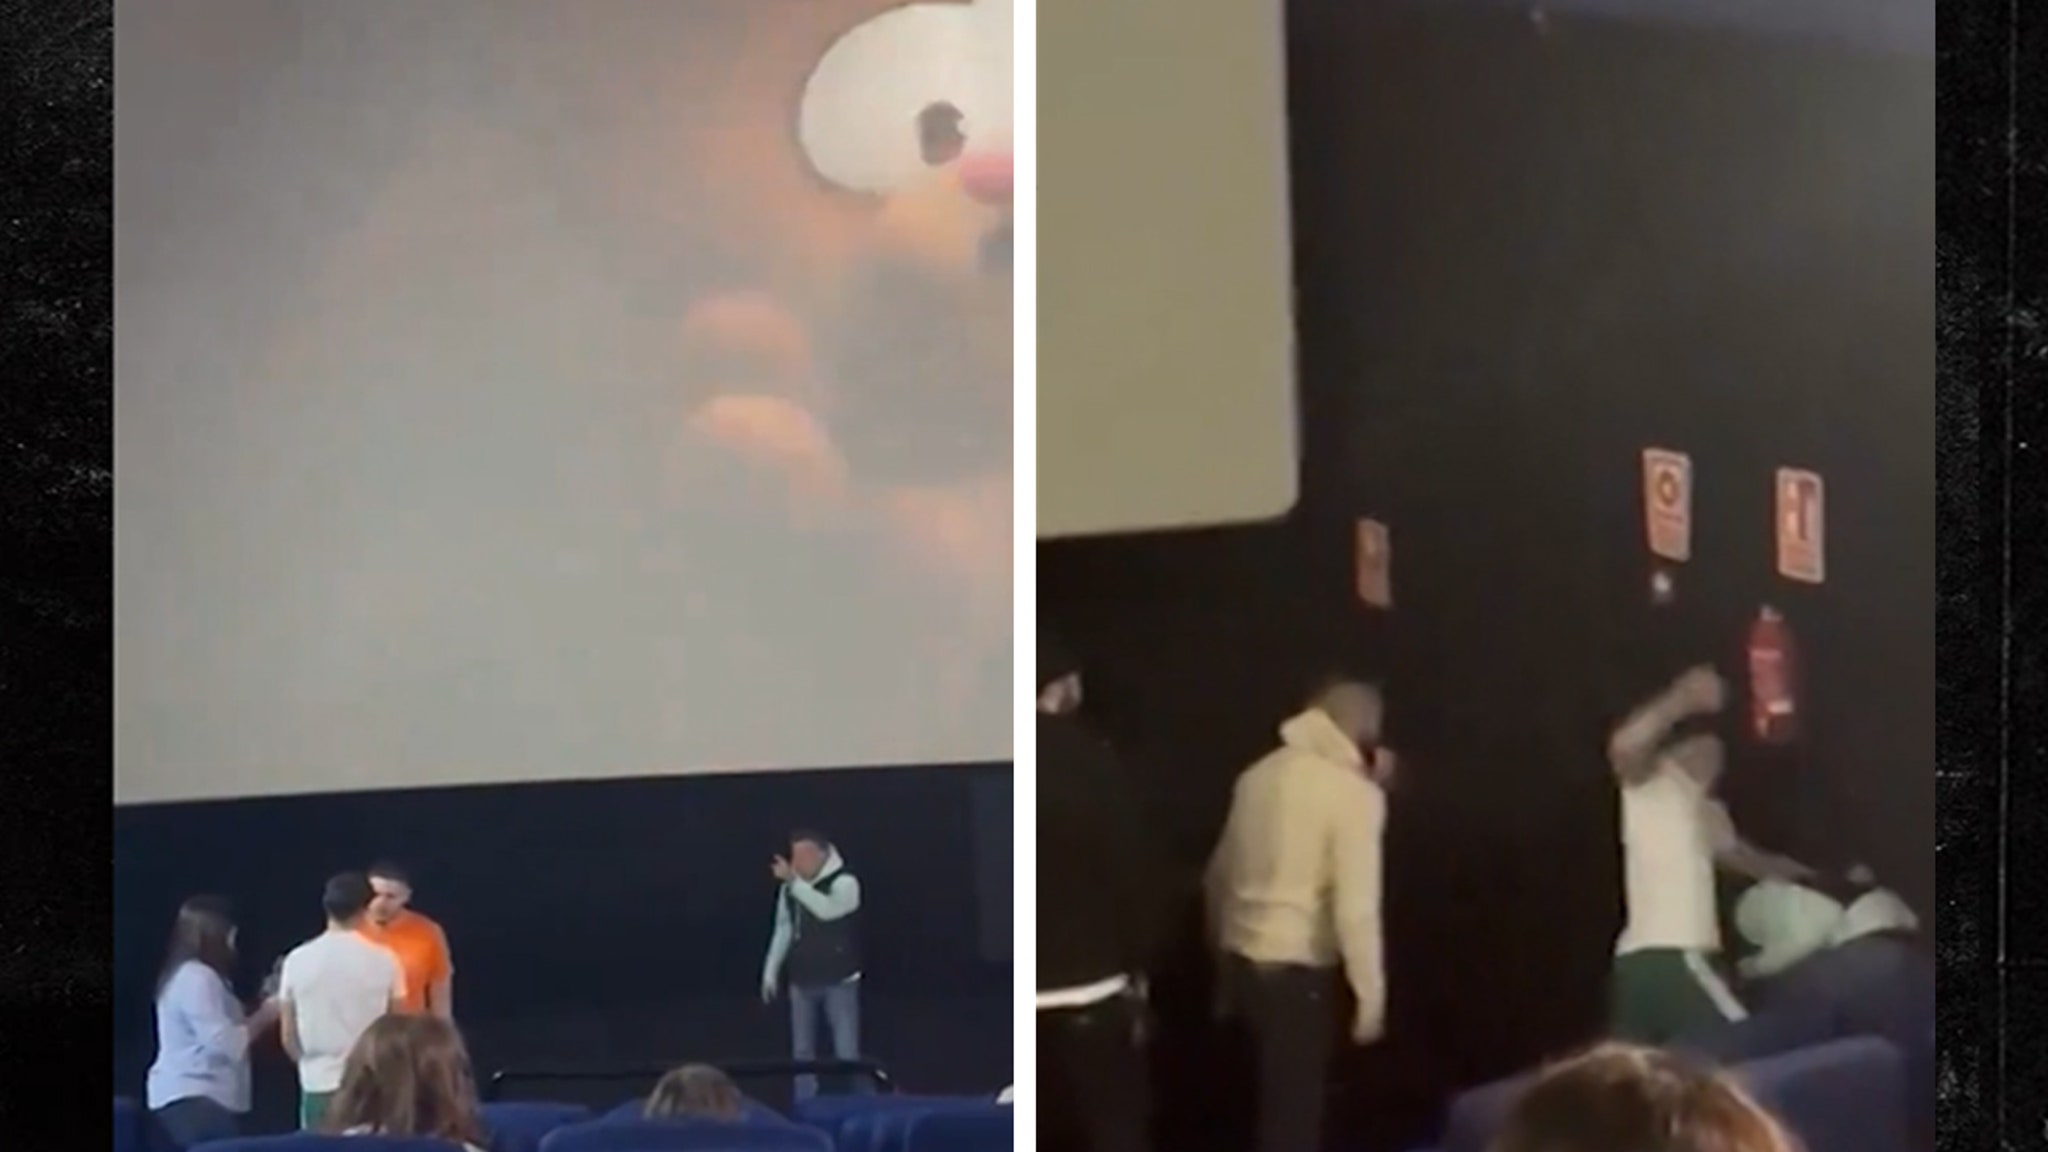 Professional Boxer Beats Up Moviegoer During 'Garfield,' Wild Video Shows